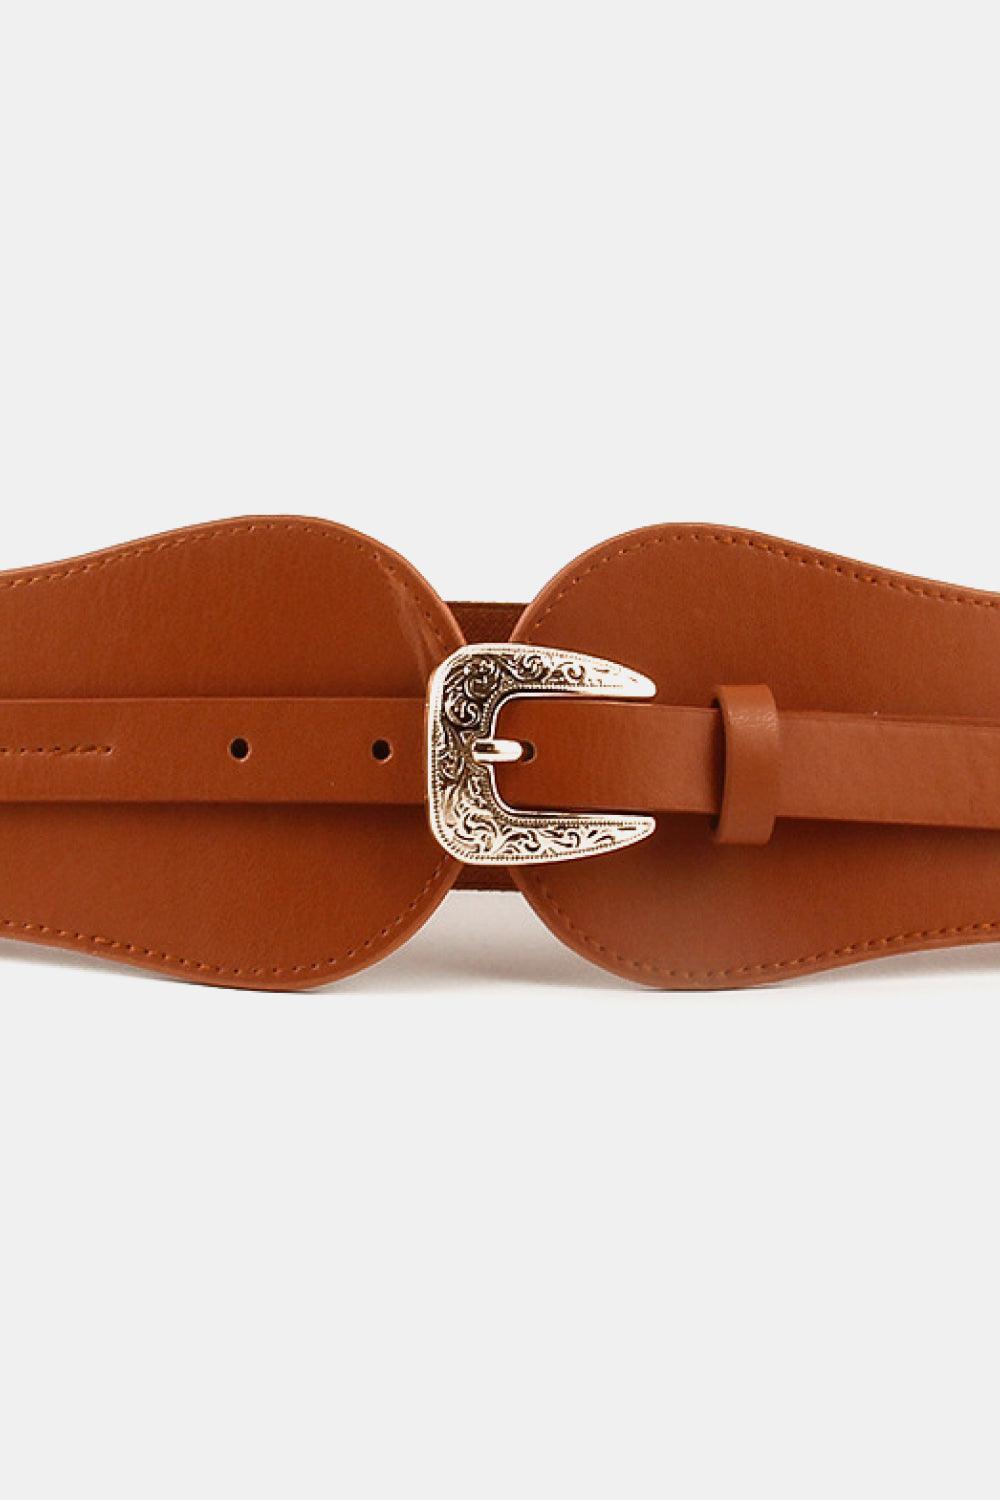 Be Exceptional Alloy Buckle Wide Stretch Belt - MXSTUDIO.COM